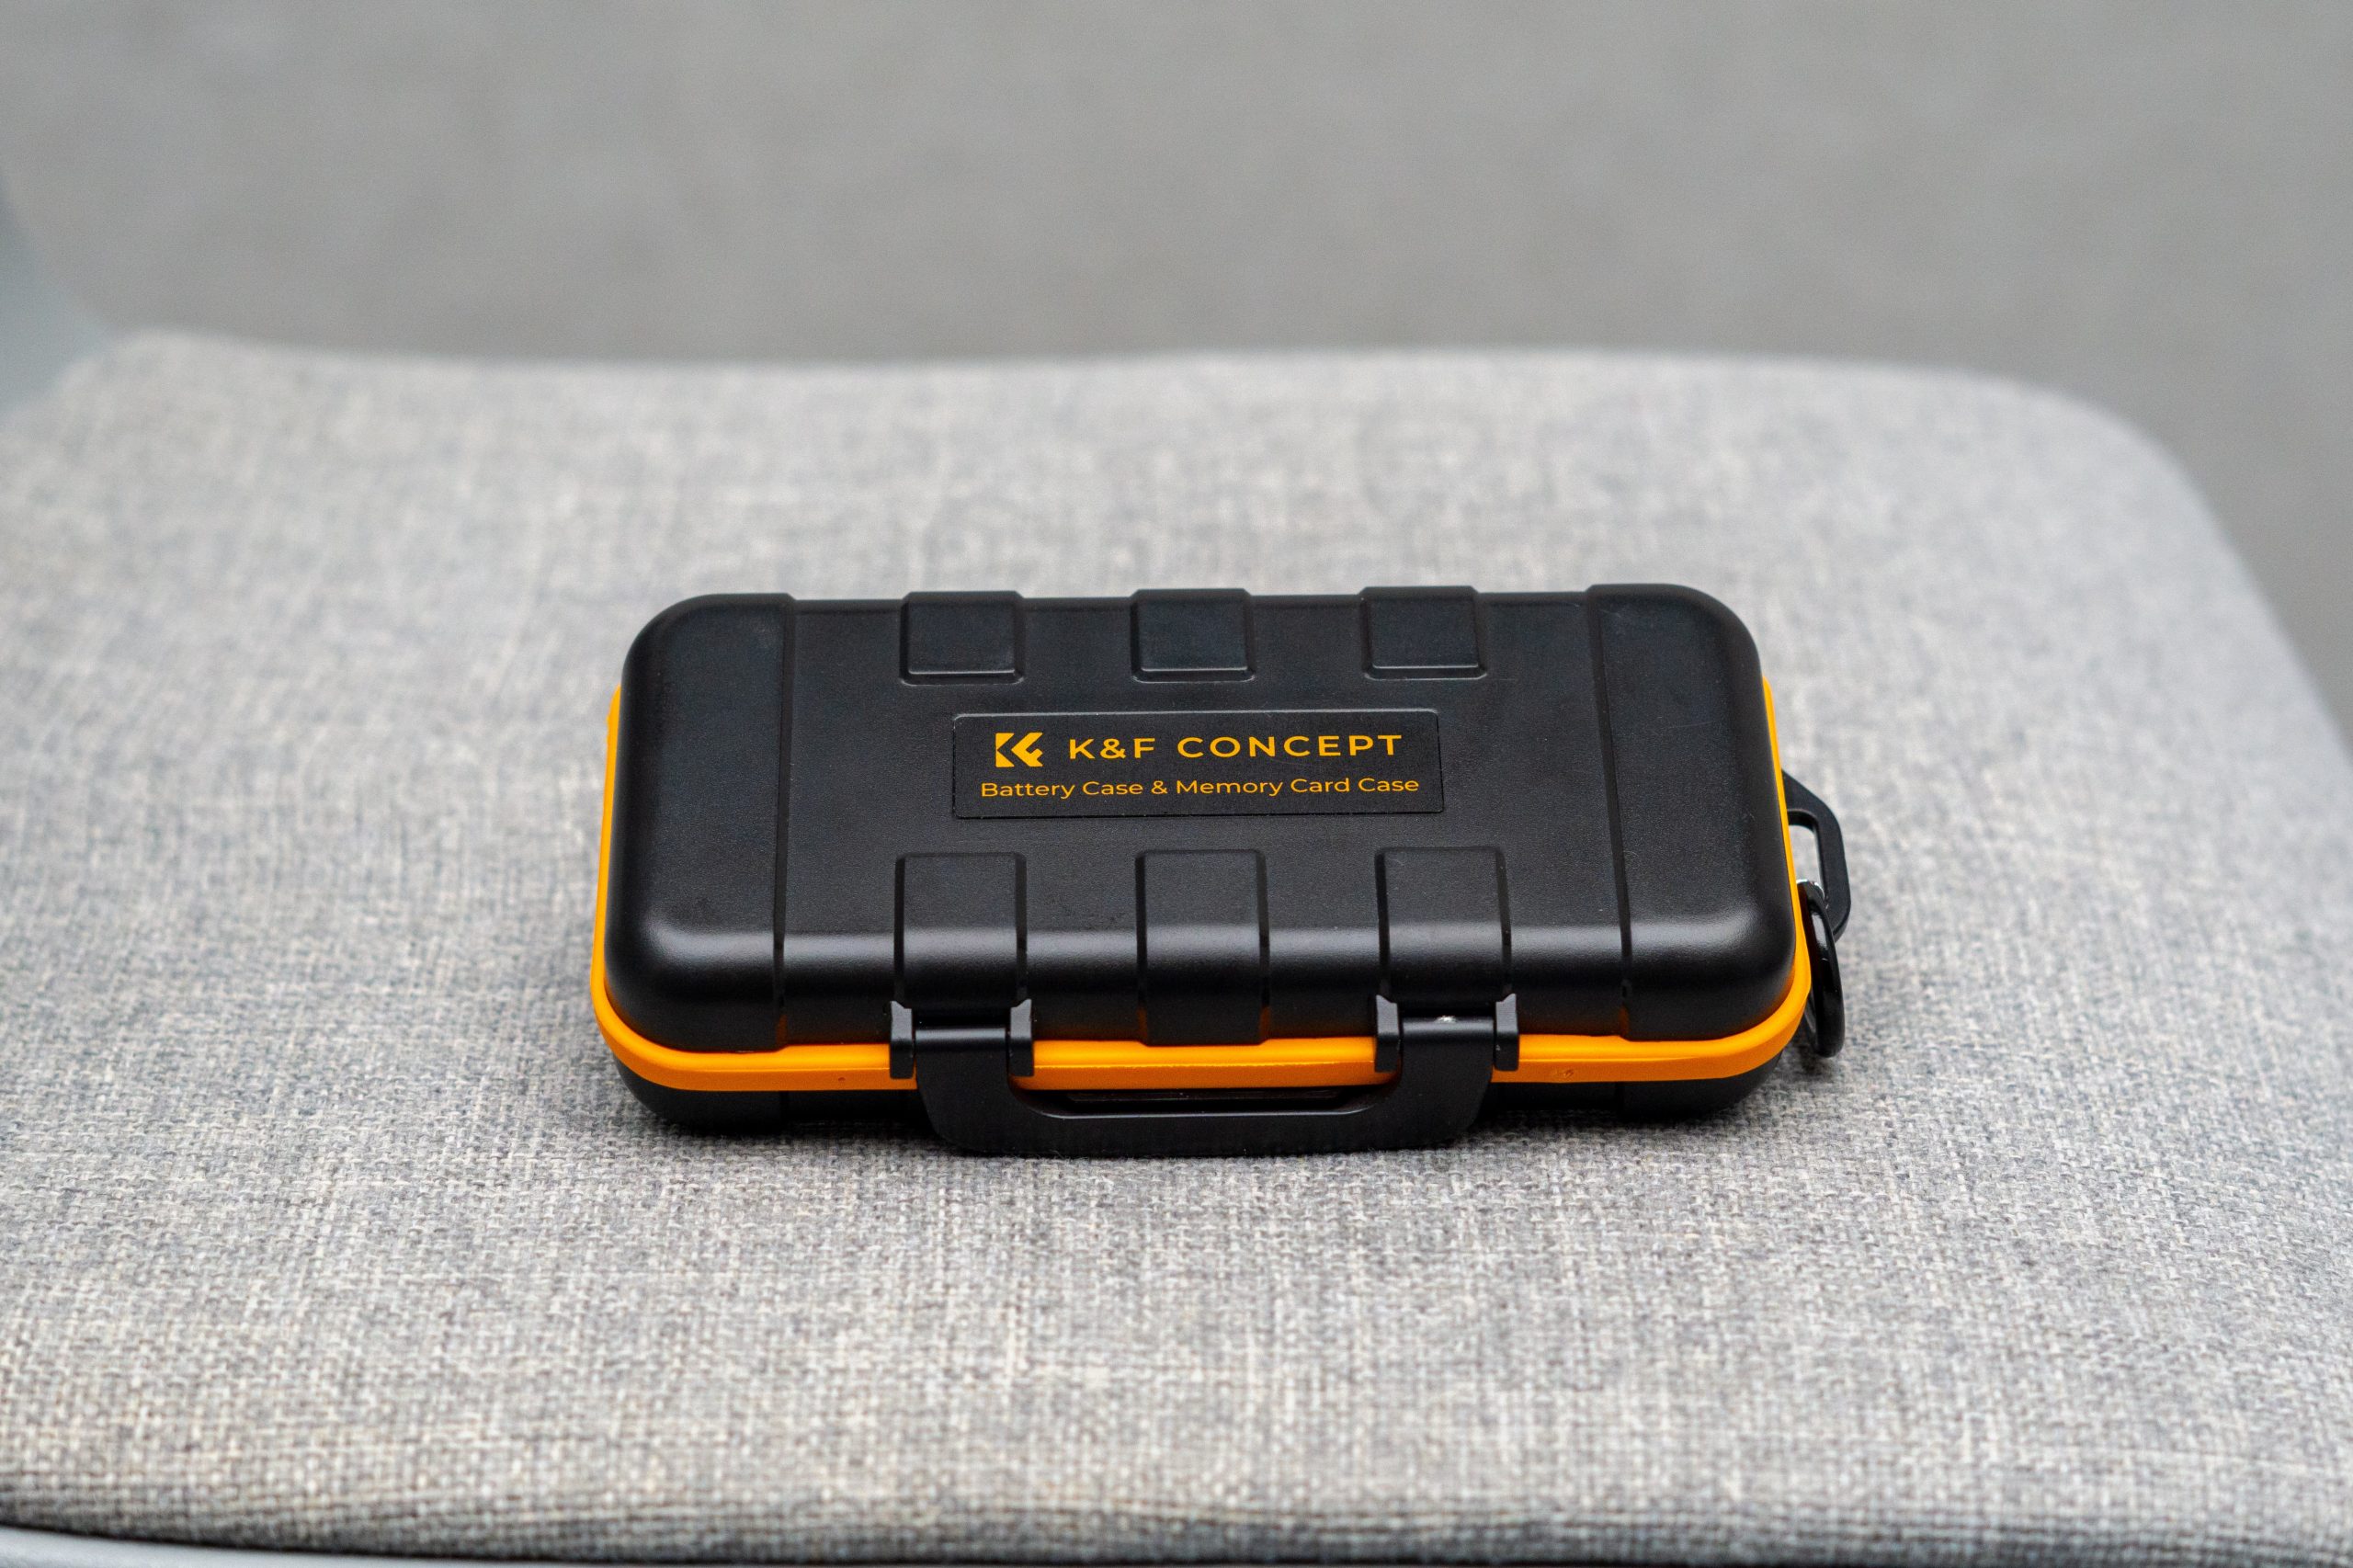 K&F Concept 16 Slot SD Card and Battery Case Review